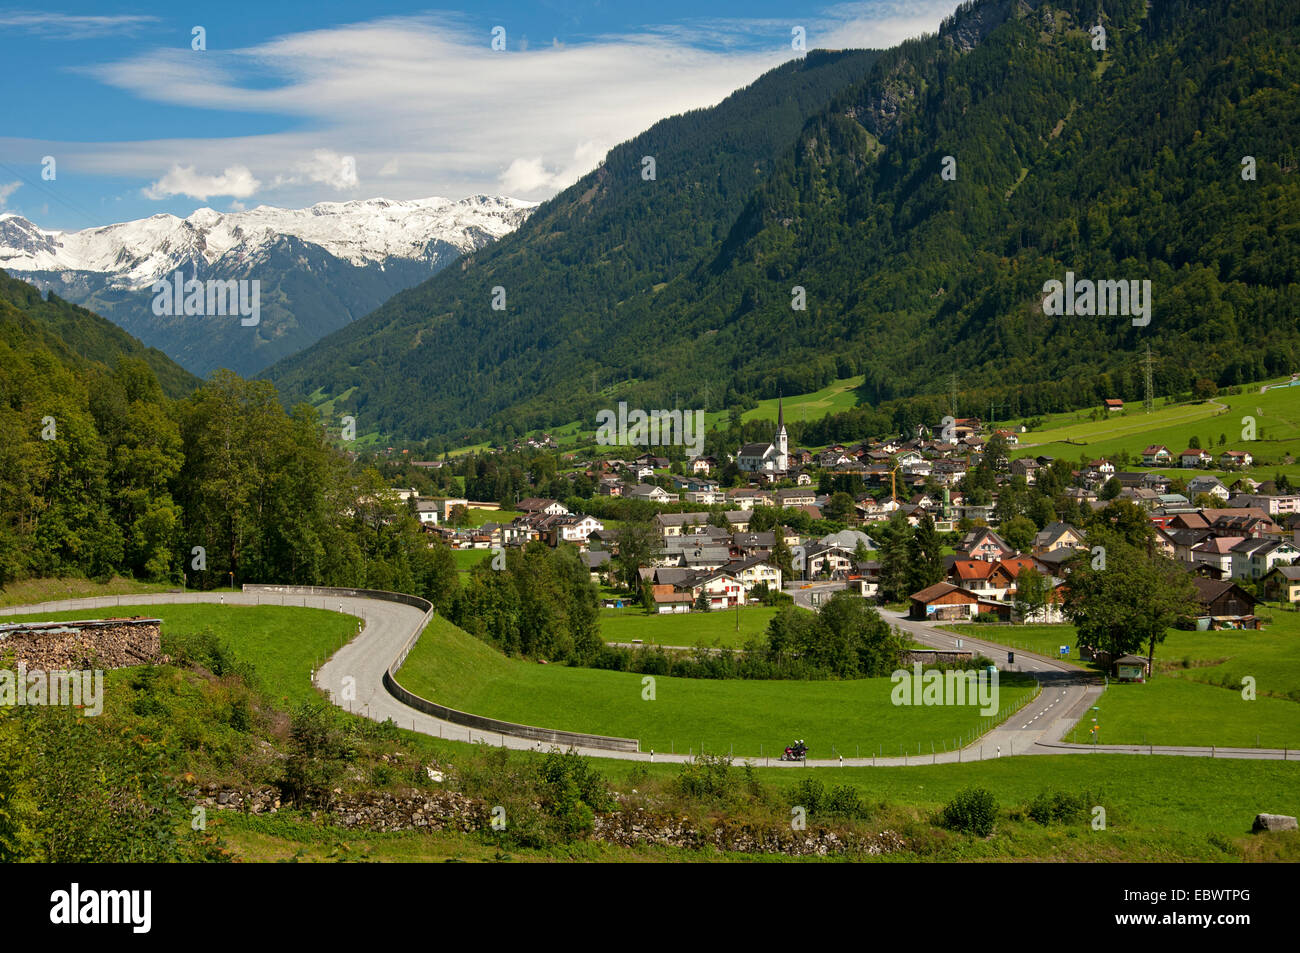 Winding road in front of the village of Linthal, Glarus Alps at back, Linthal, Glarus Süd, Canton of Glarus, Switzerland Stock Photo